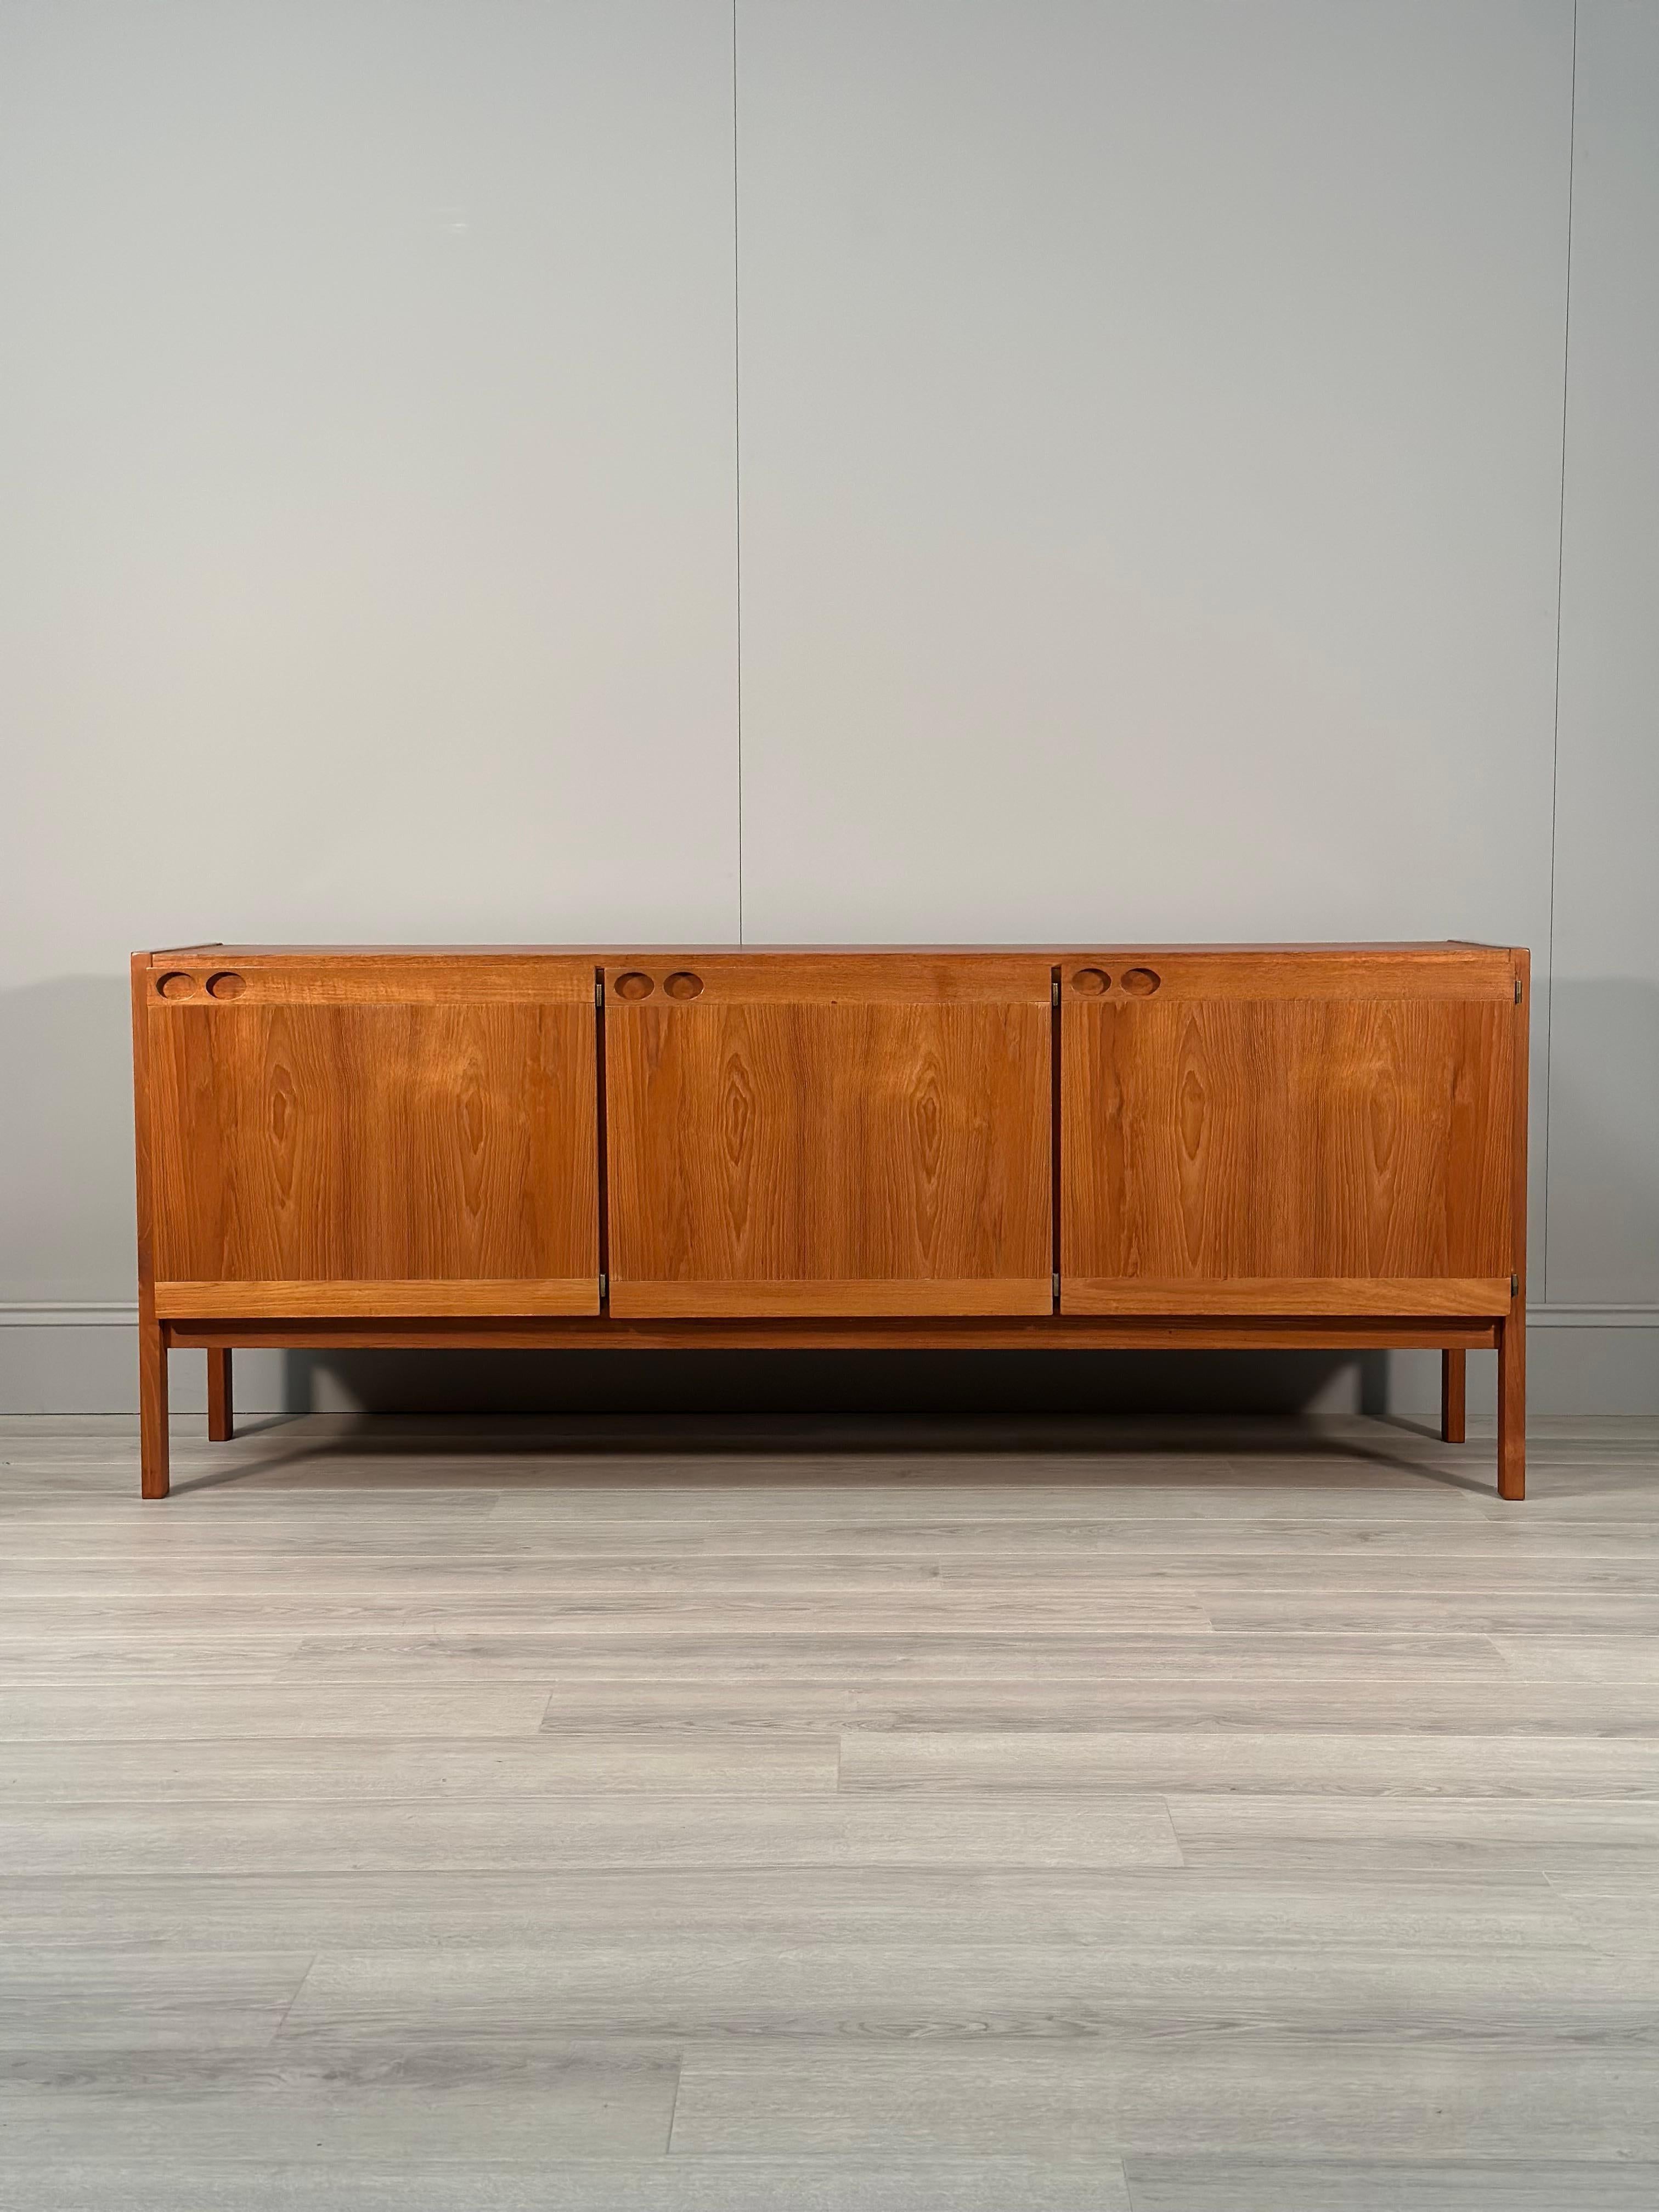 Mid 20th century Danish teak sideboard designed by Ib Kofod Larsen and produced by Faarup Møbelfabrik in the 1960s. The sideboard has three doors, three inner drawers and plenty of storage space. Overall in very good conditon with some age related